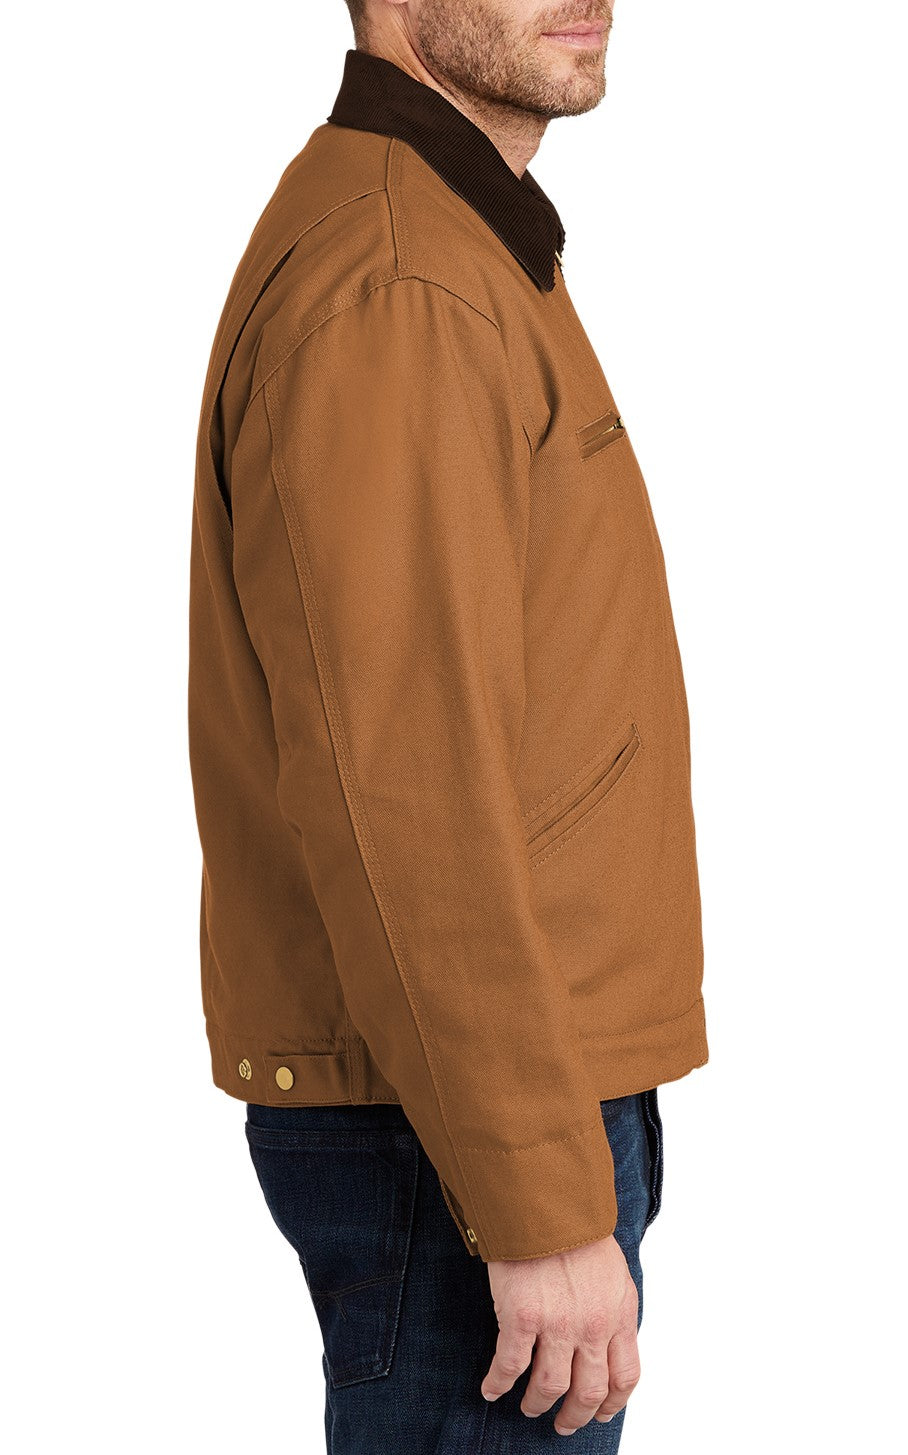 Duck Brown canvas jacket with corduroy collar by Flying R Ranchwear